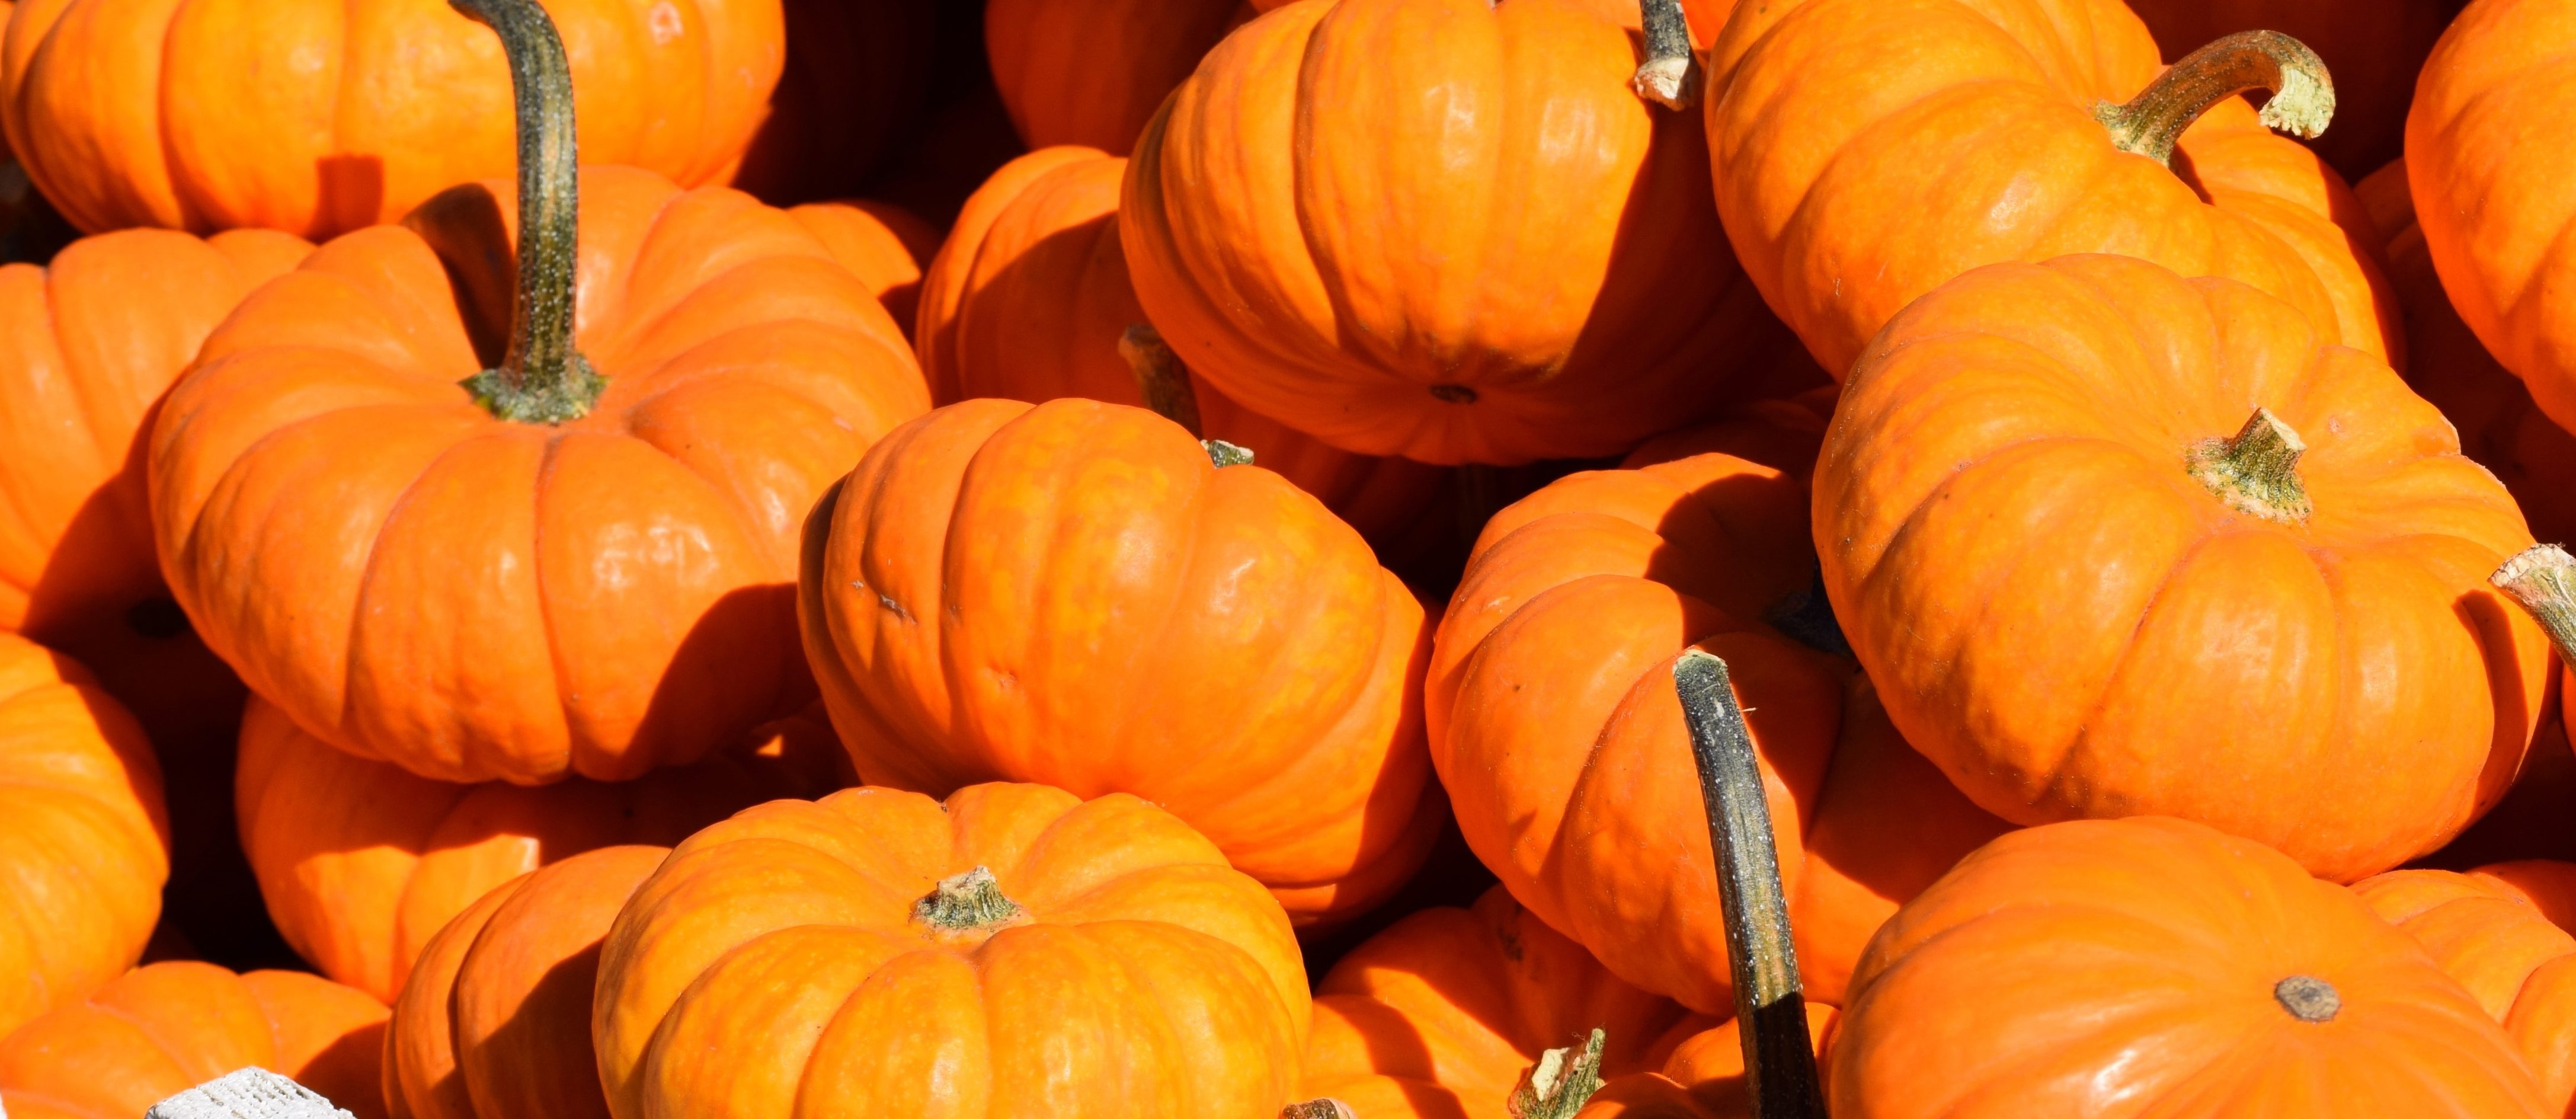 Left over pumpkins? Here are ways to use them up…